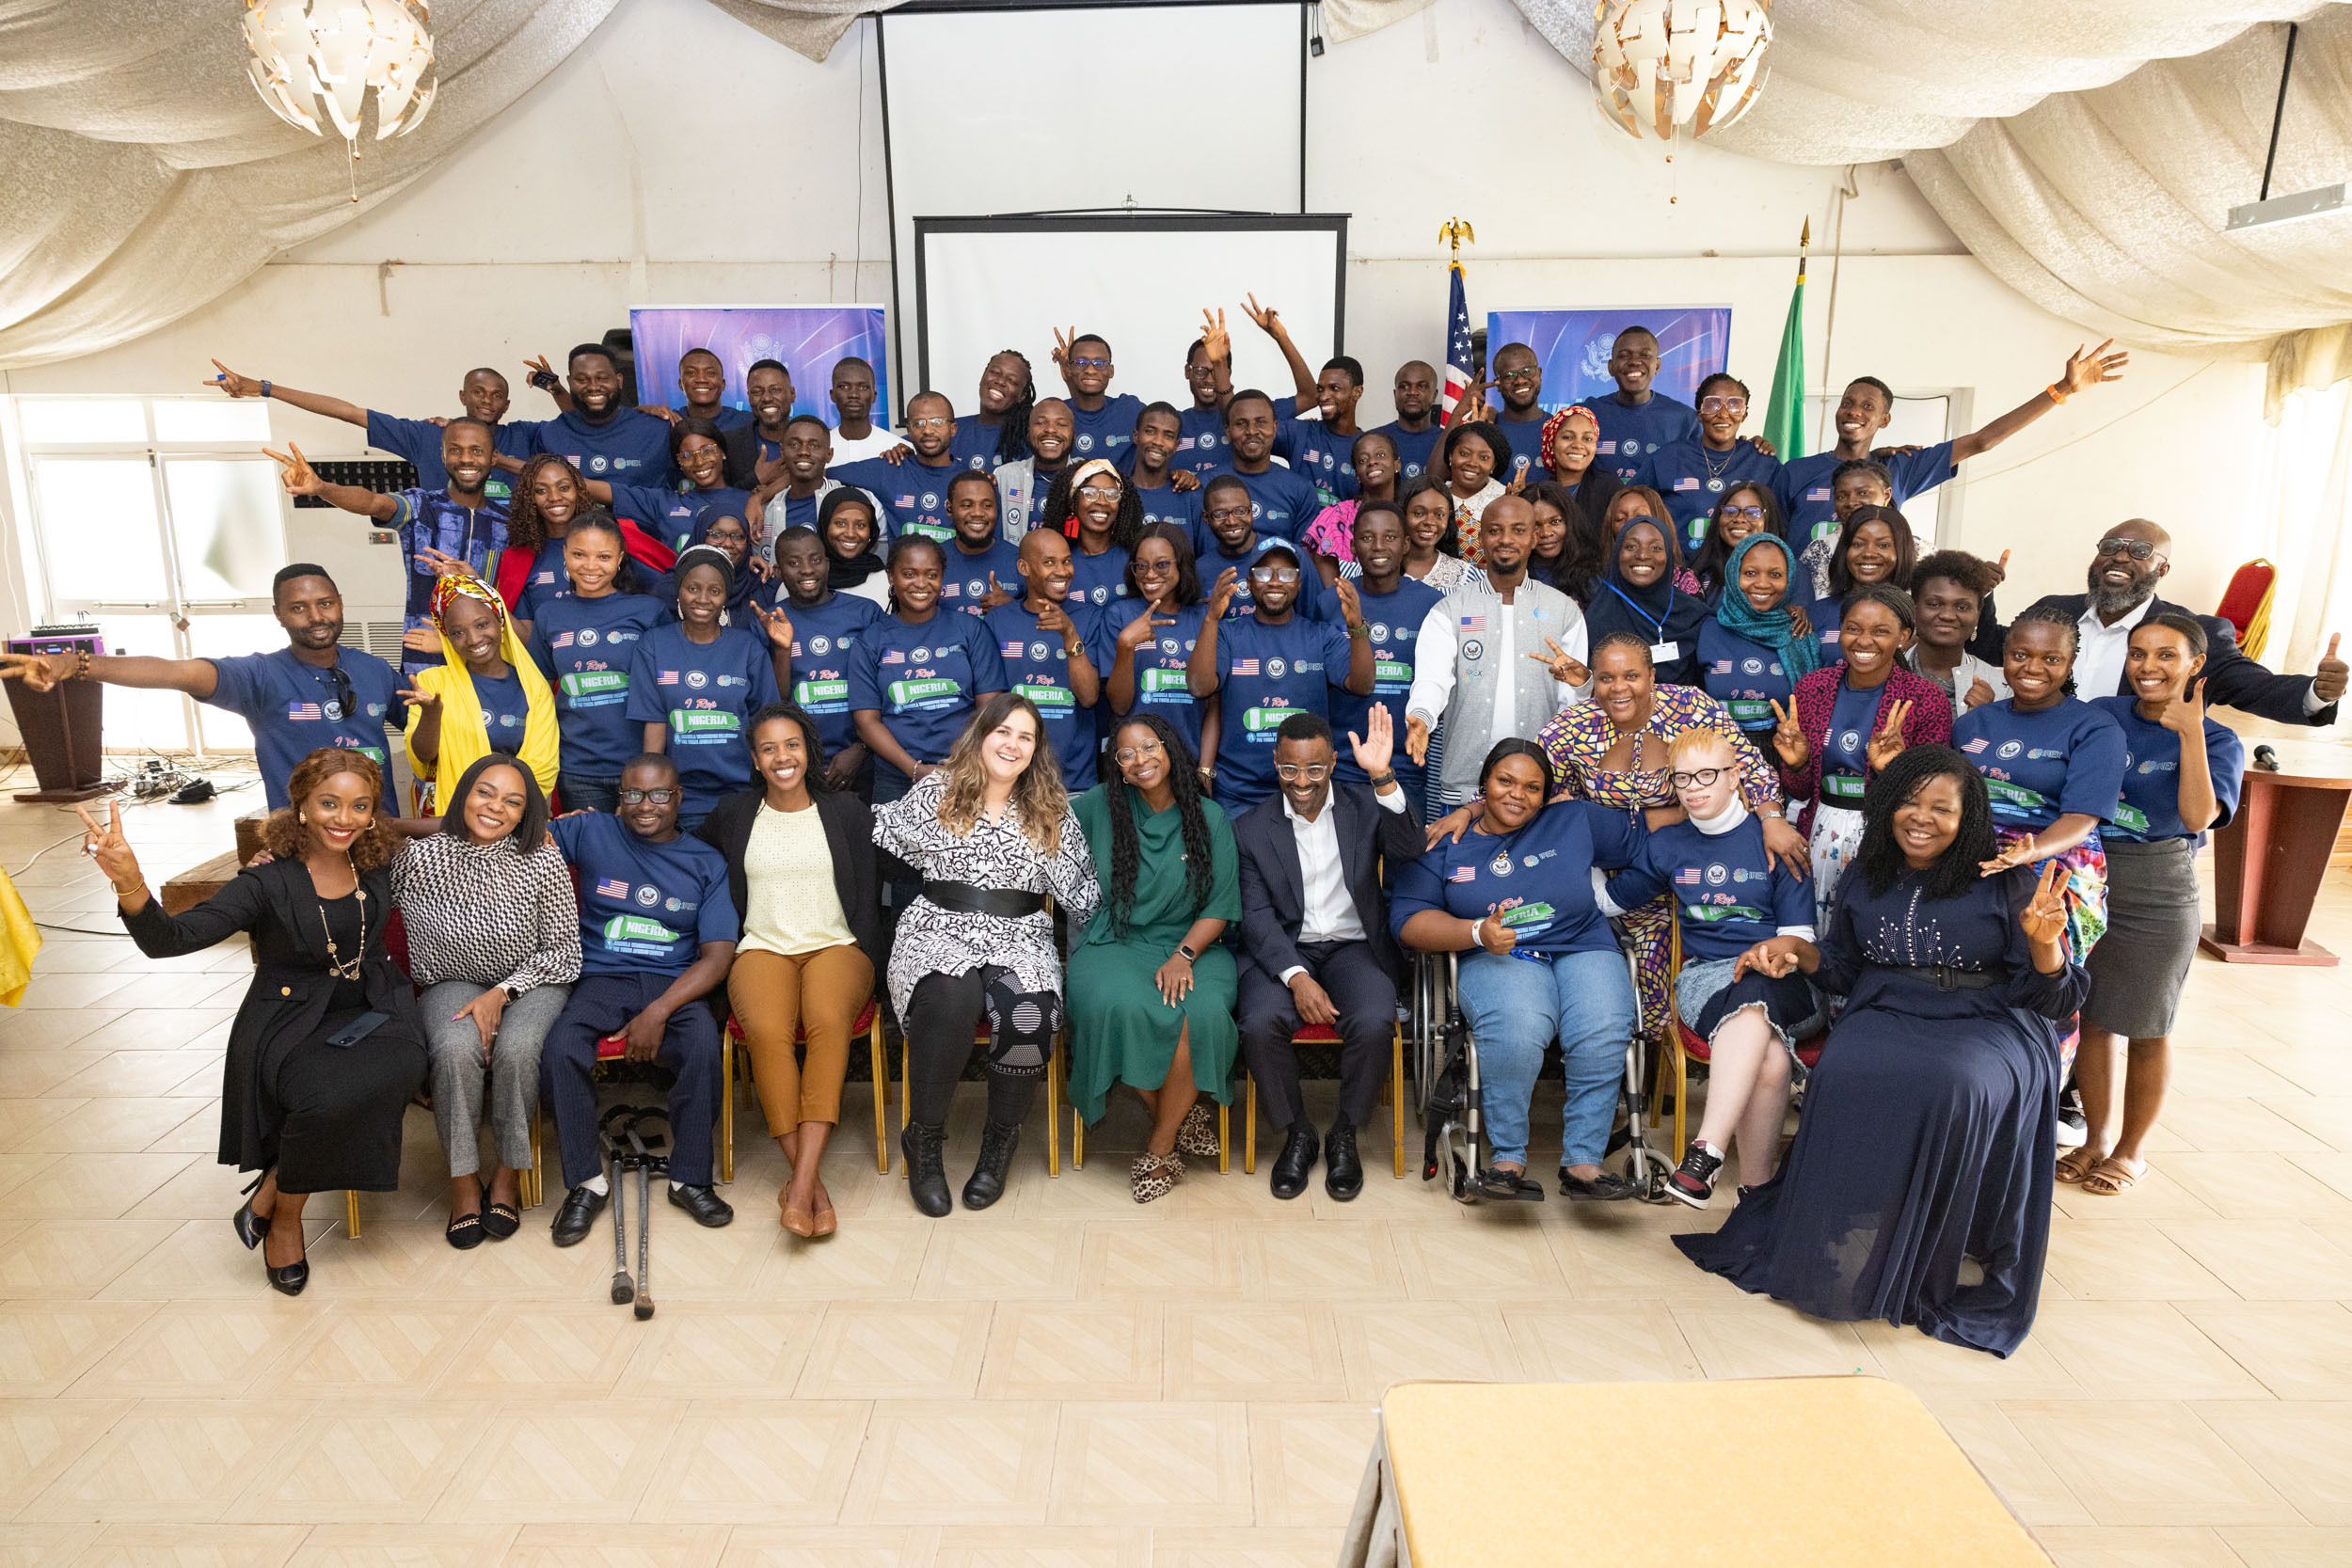 56 Young Nigerians to Travel to the United States as part of the 10th Anniversary of the Mandela Washington Fellowship program